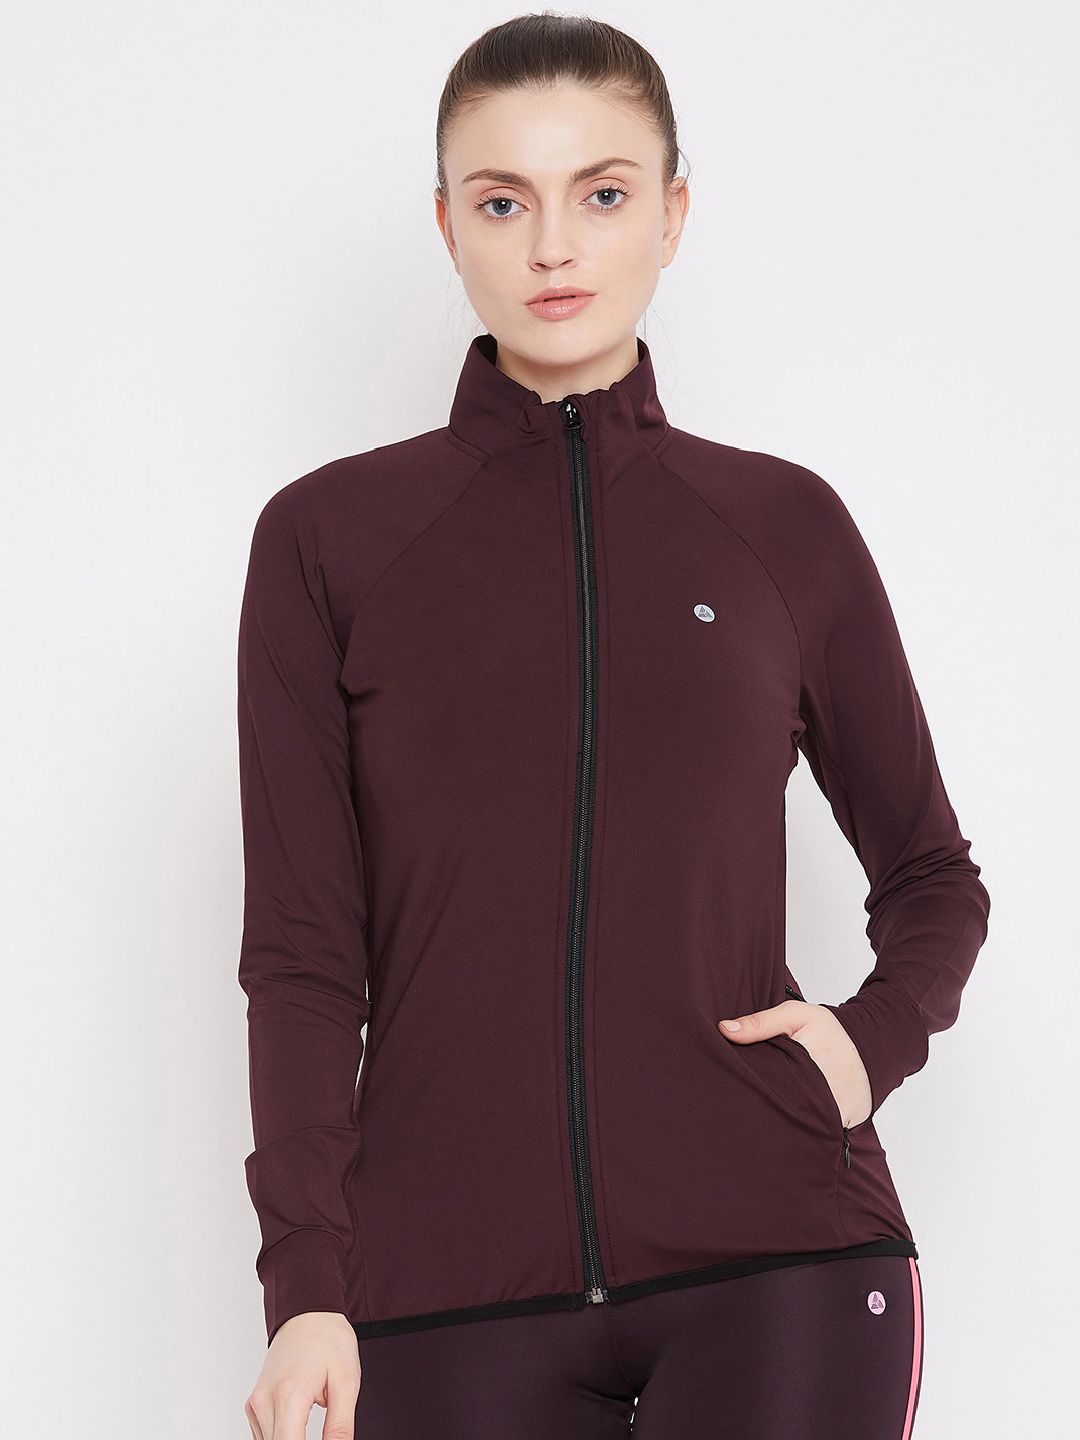 ATHLISIS Women Maroon Lightweight e-Dry Technology Training or Gym Sporty Jacket Price in India